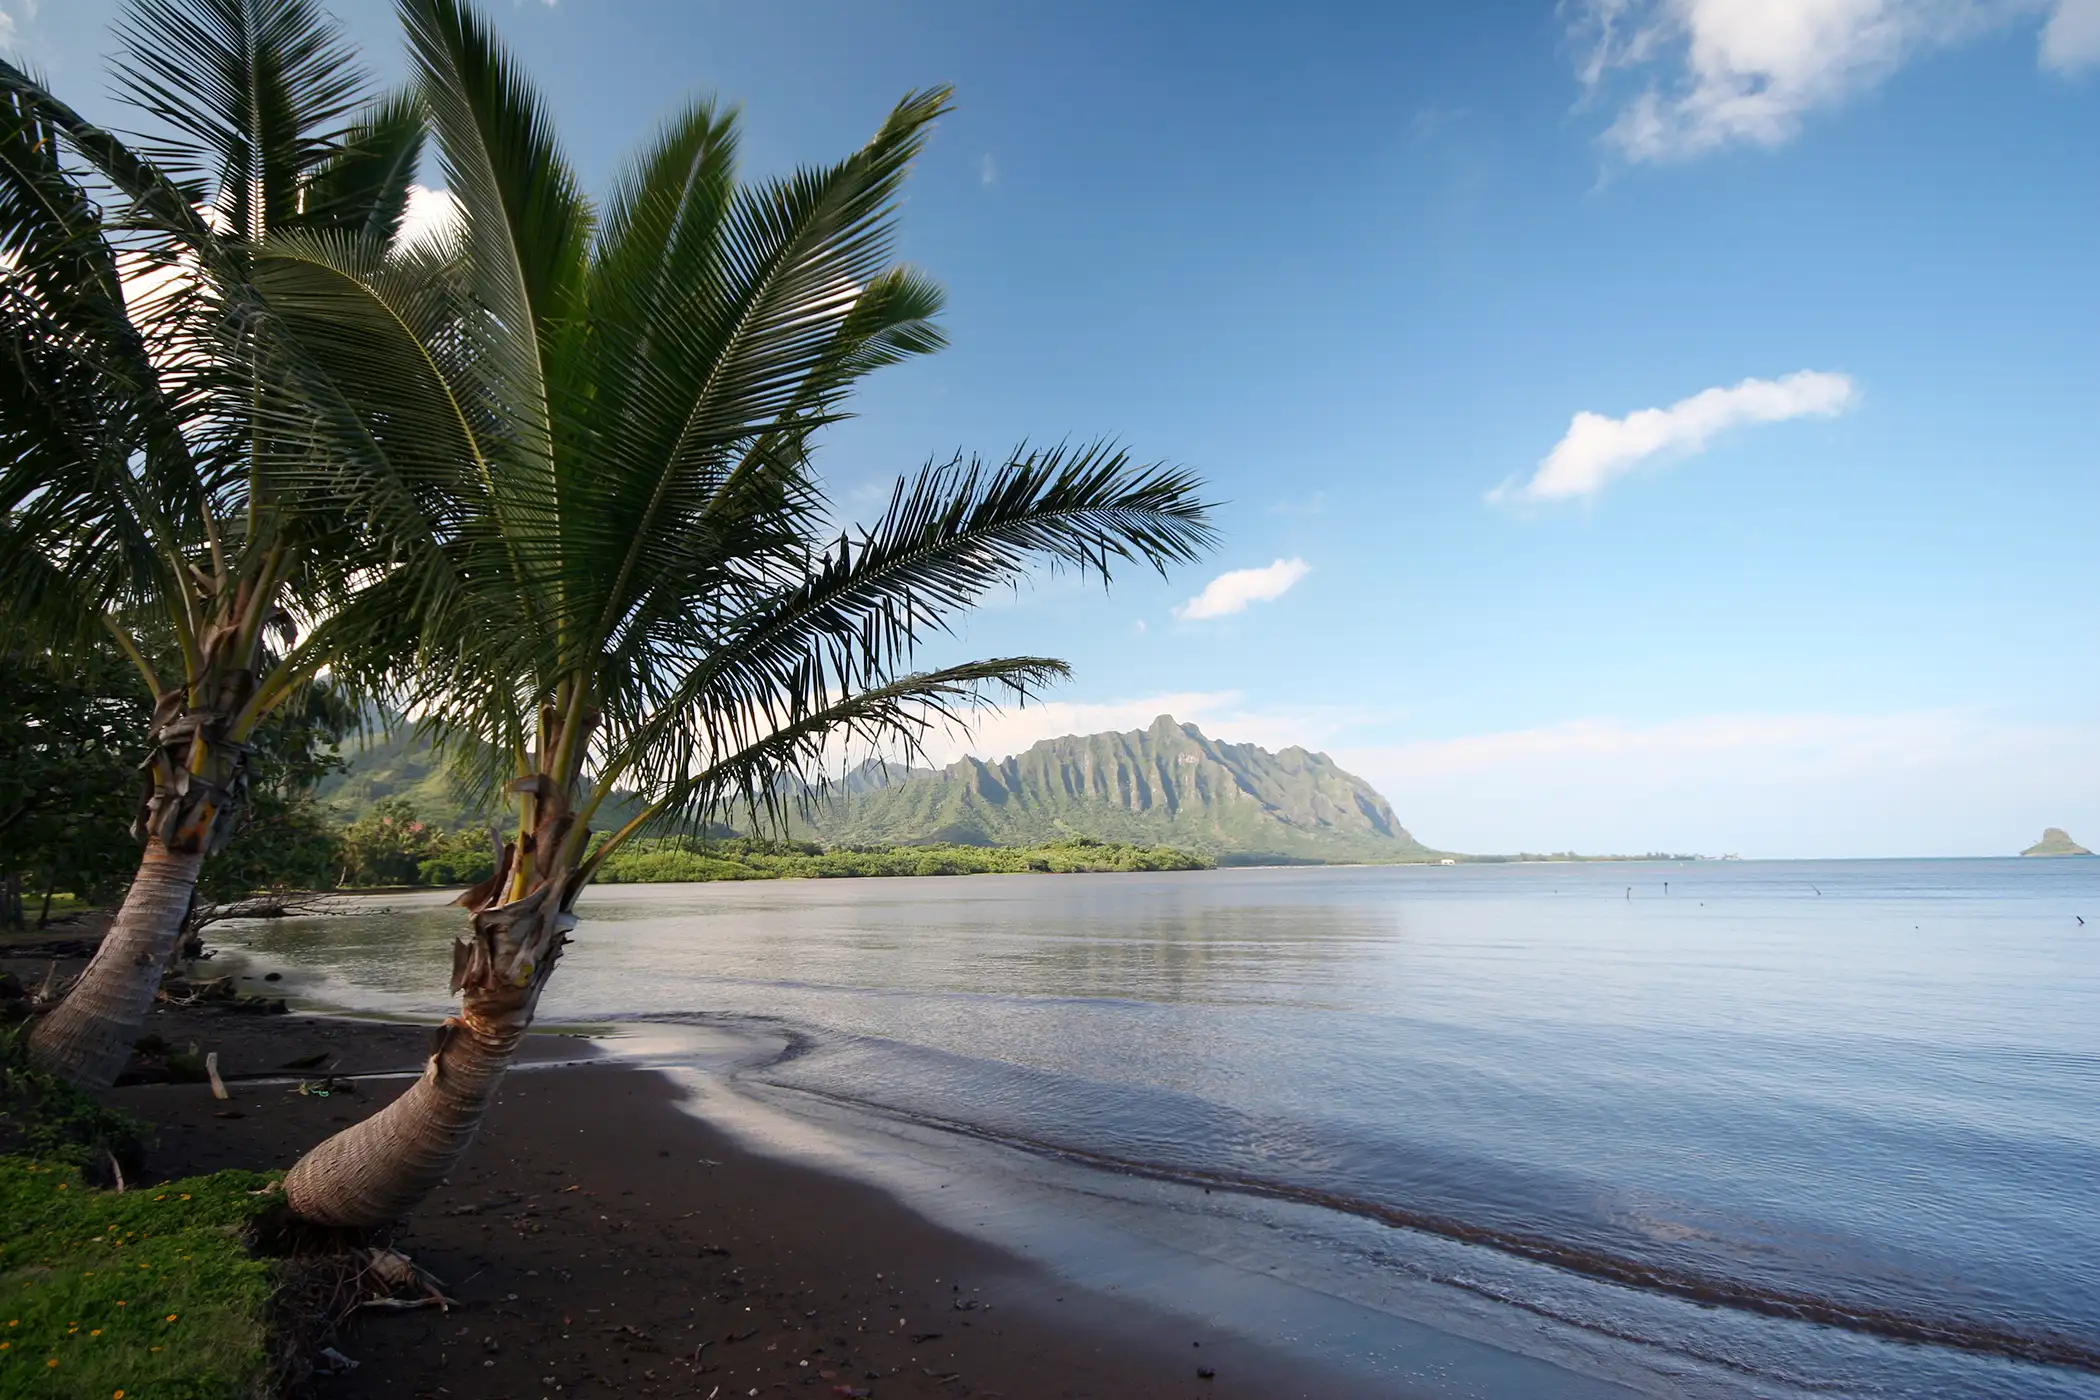 Koolaupoko, Hawaii. This southeastern district off the windward coast of Oahu has the lush valleys, gorgeous beaches, and barrier reefs that the 50th state is famous for, along with a rich history and a 3.6% unemployment rate.